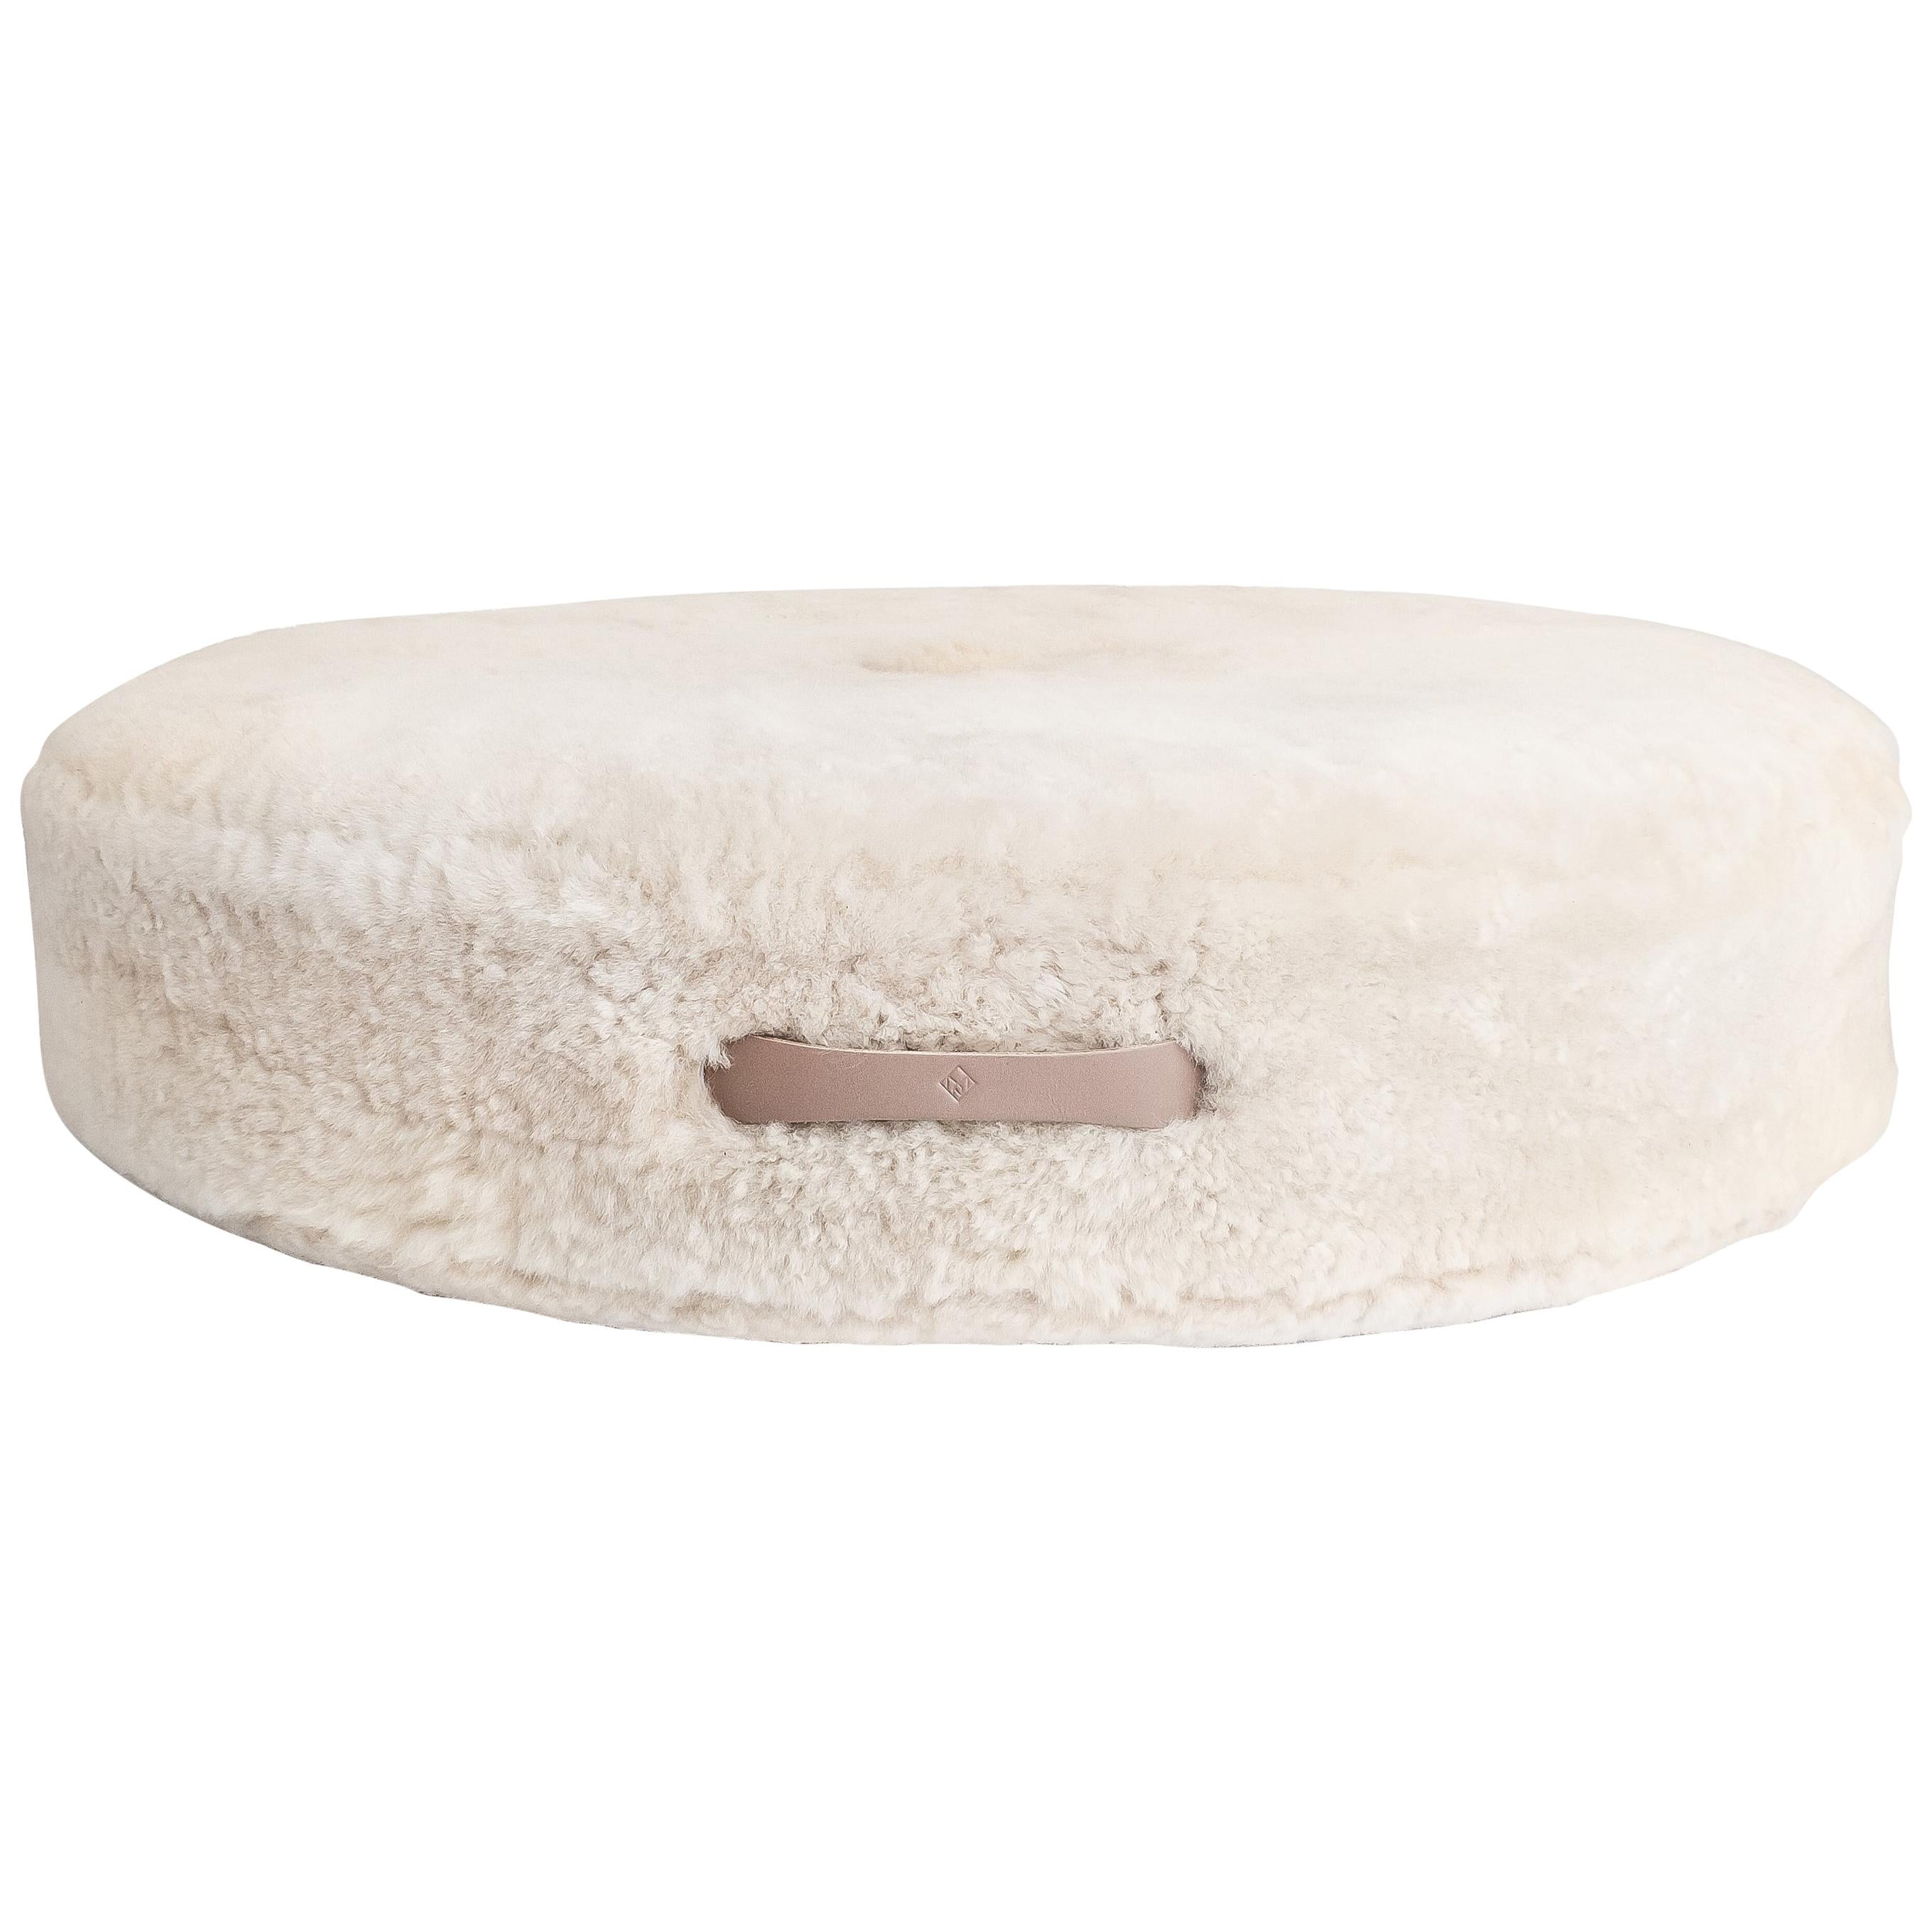 Stacking Floor Cushion 30" in Dune Shearling by Moses Nadel For Sale